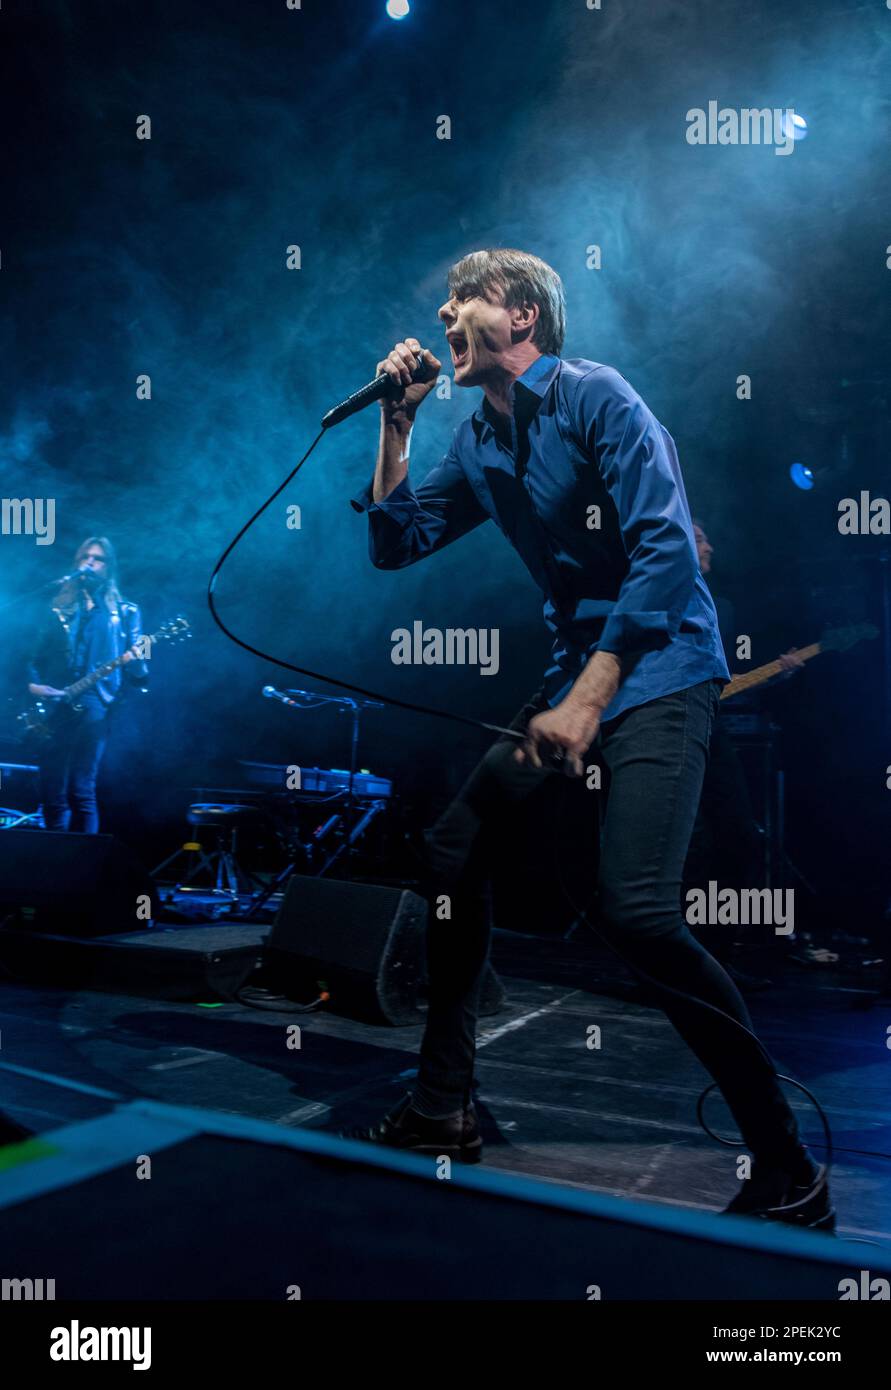 York, UK. 15th Mar, 2023. Brette Anderson, frontman of Suede, playing a live gig at The Barbican in York. In the background is guitarist Neil Codling. Picture Credit: ernesto rogata/Alamy Live News Stock Photo